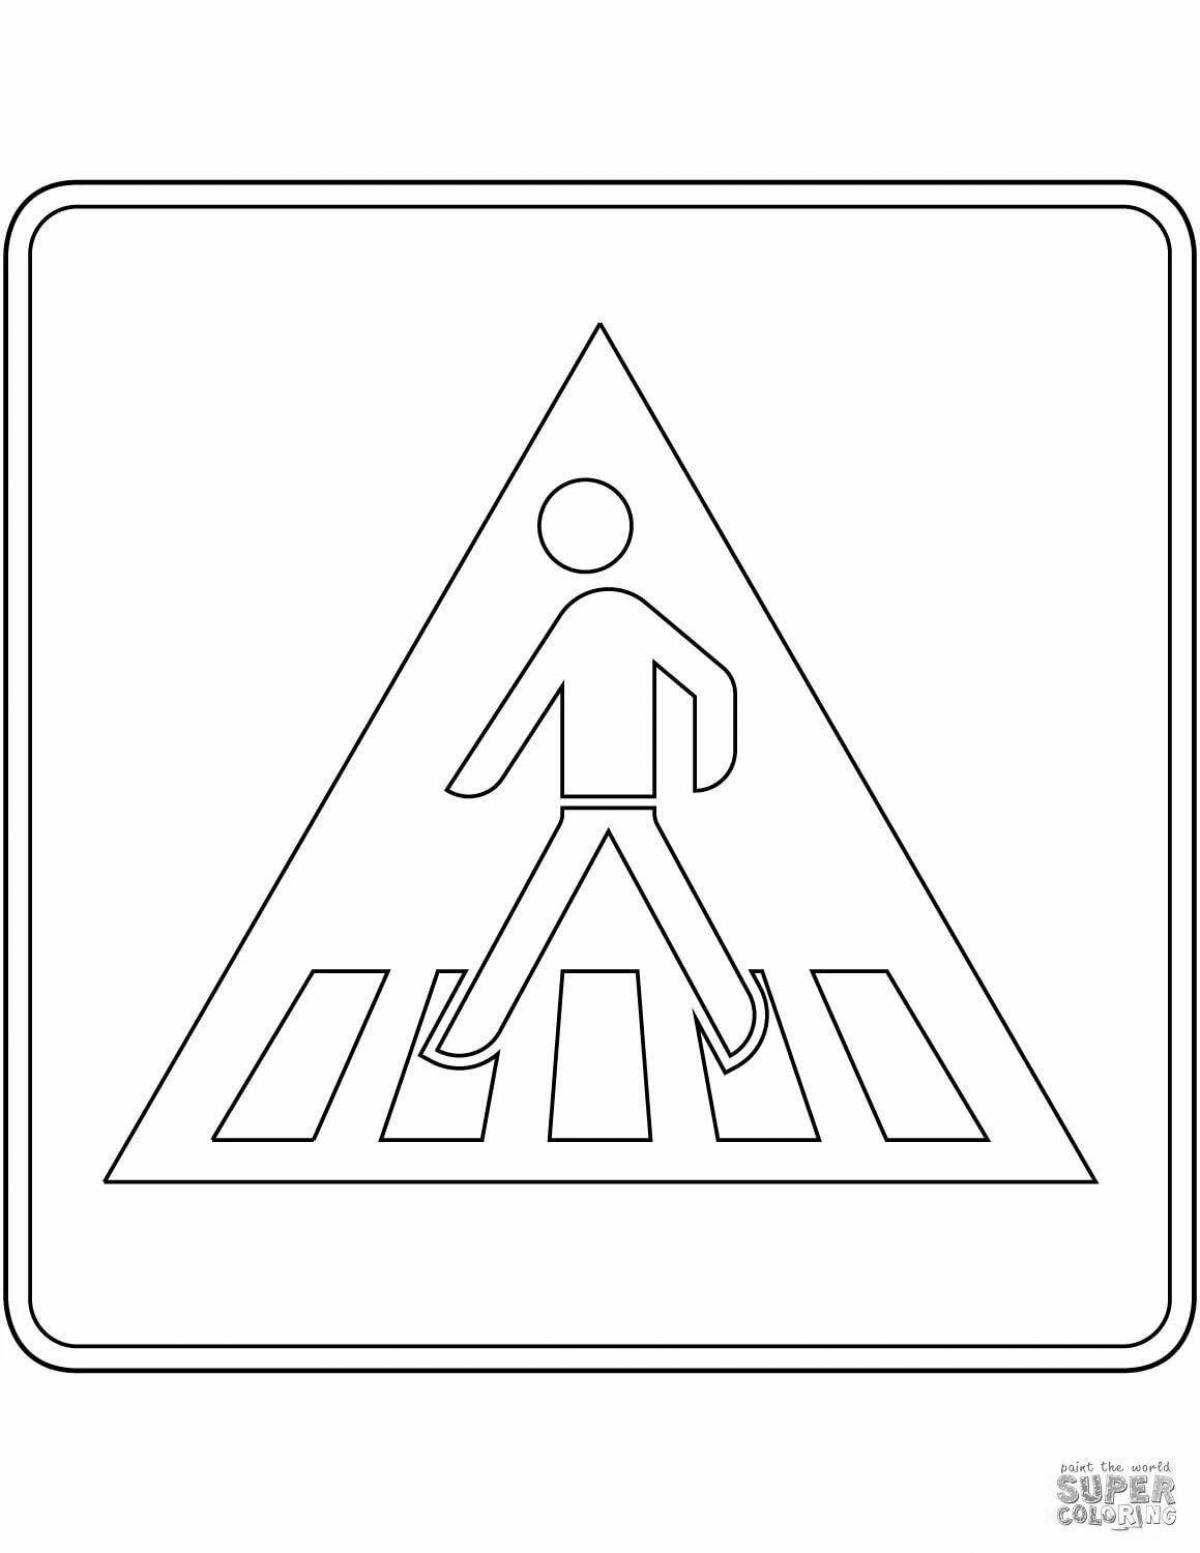 Coloring page shining caution road sign for children